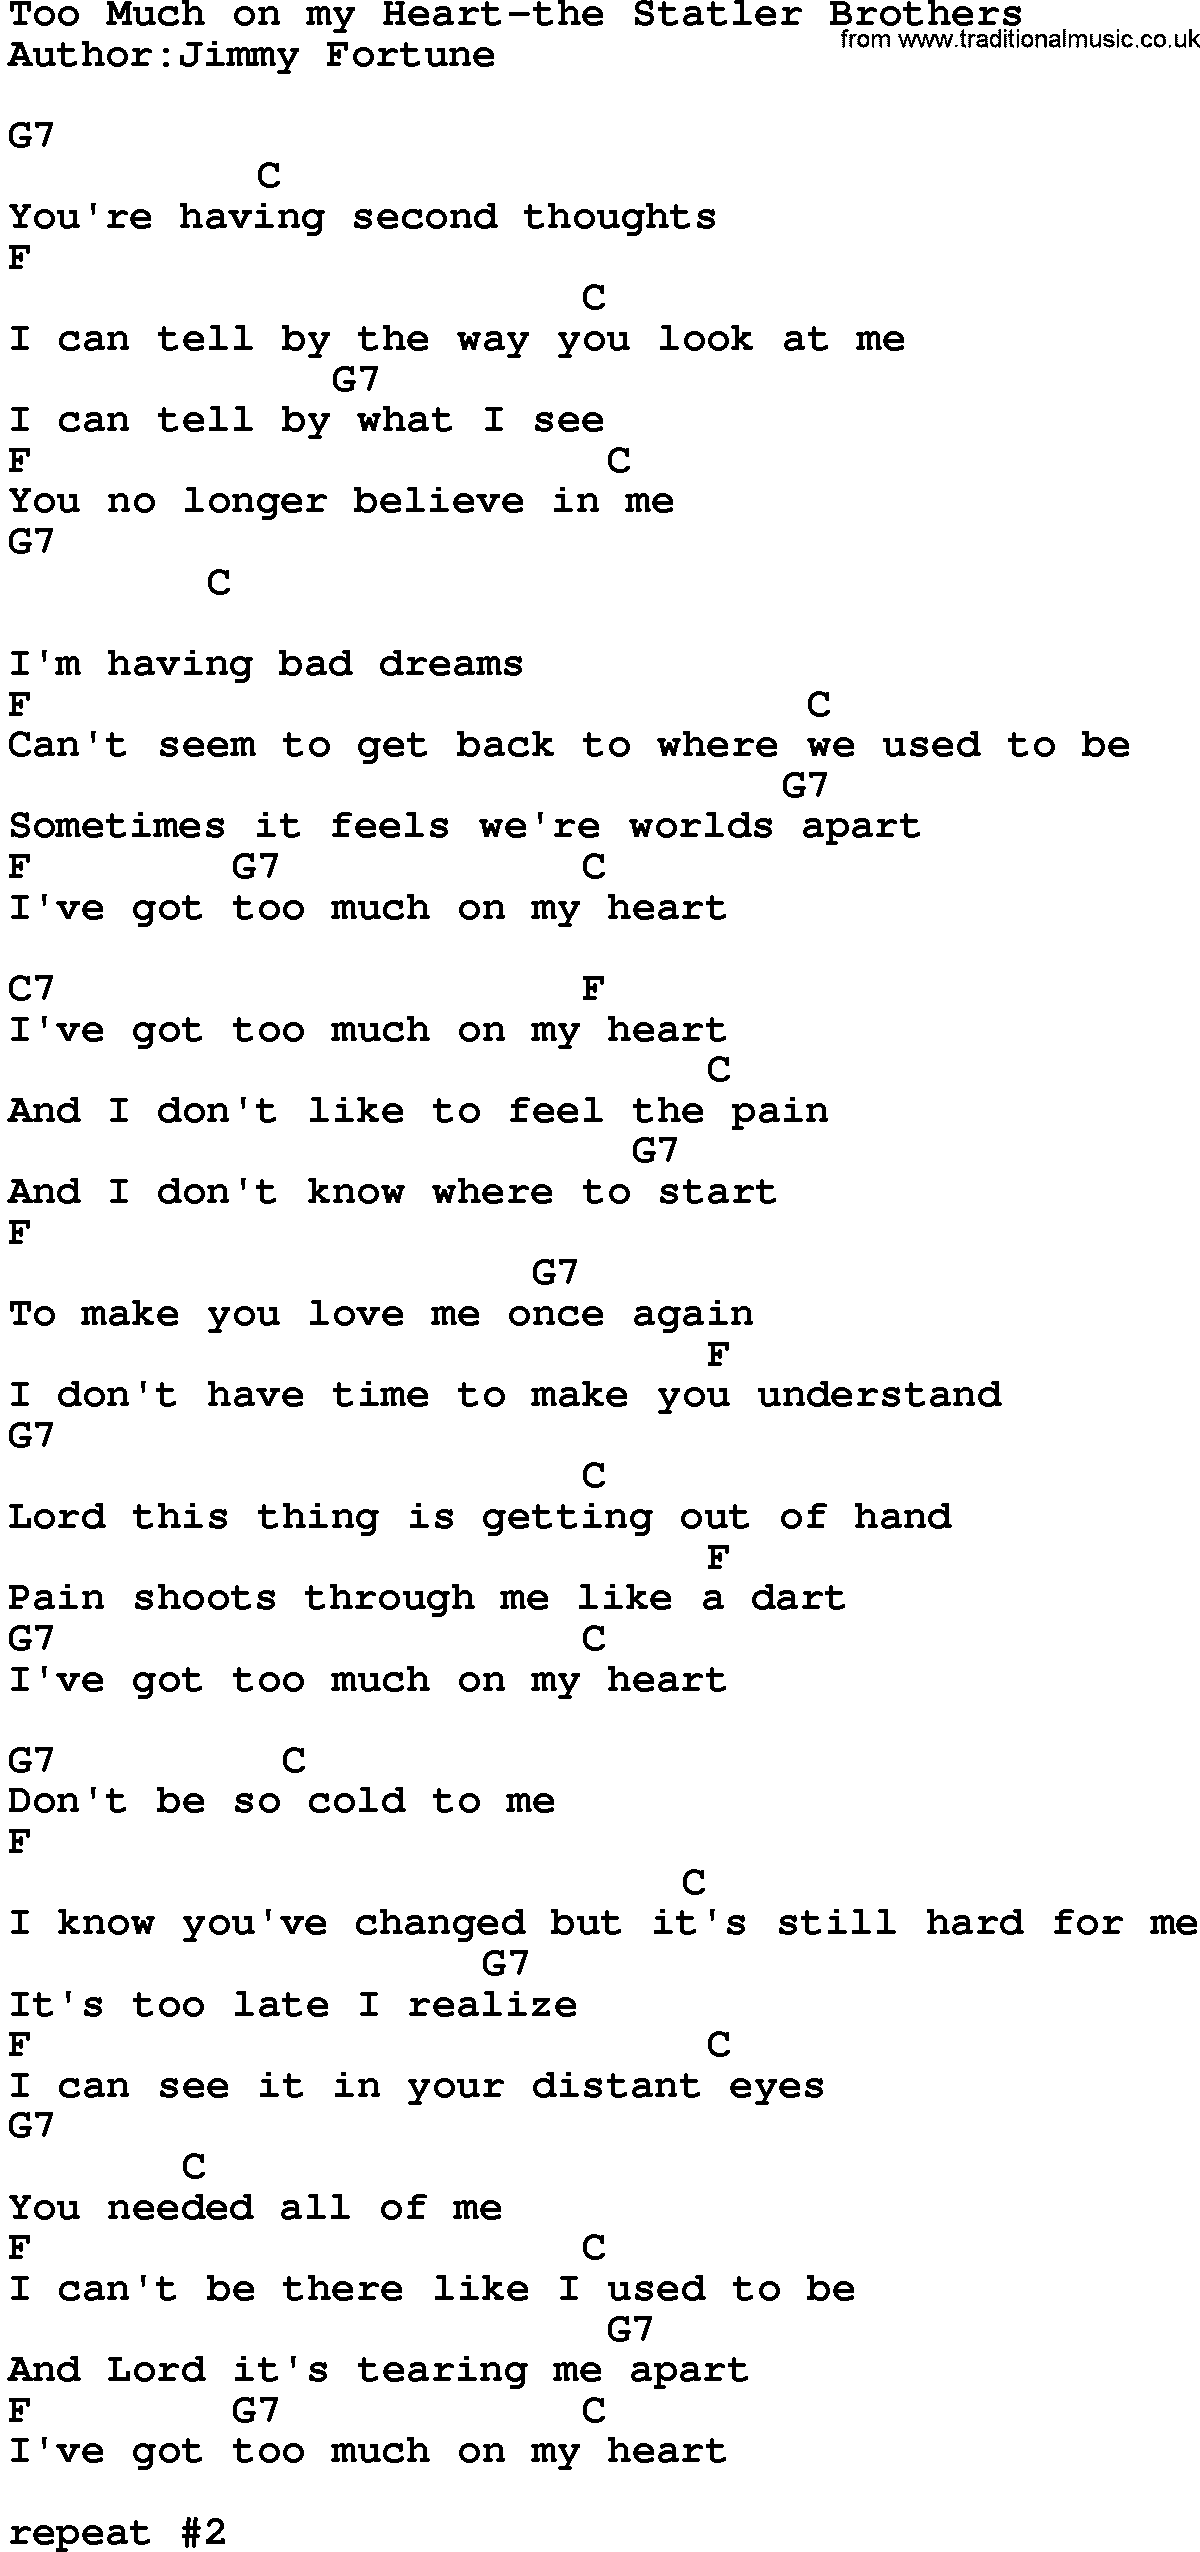 Country music song: Too Much On My Heart-The Statler Brothers lyrics and chords